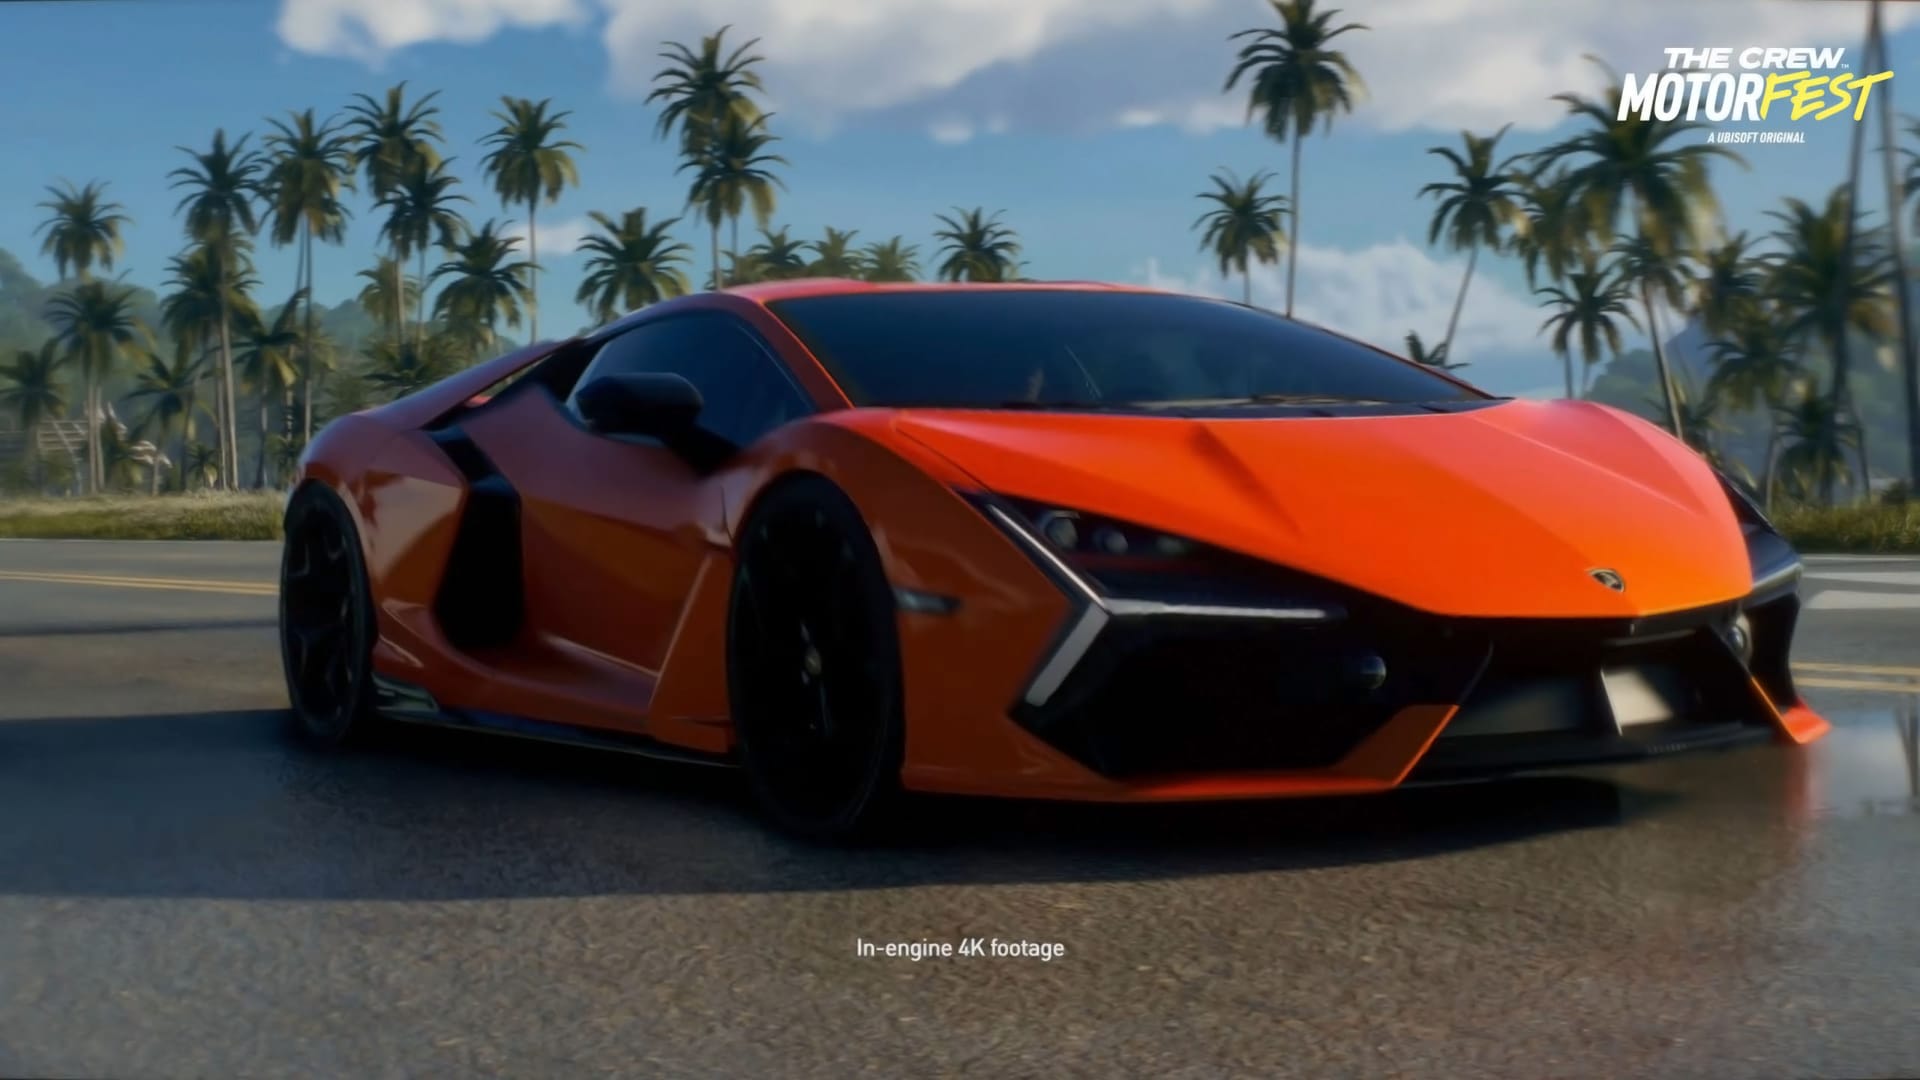 Review: The Crew Motorfest